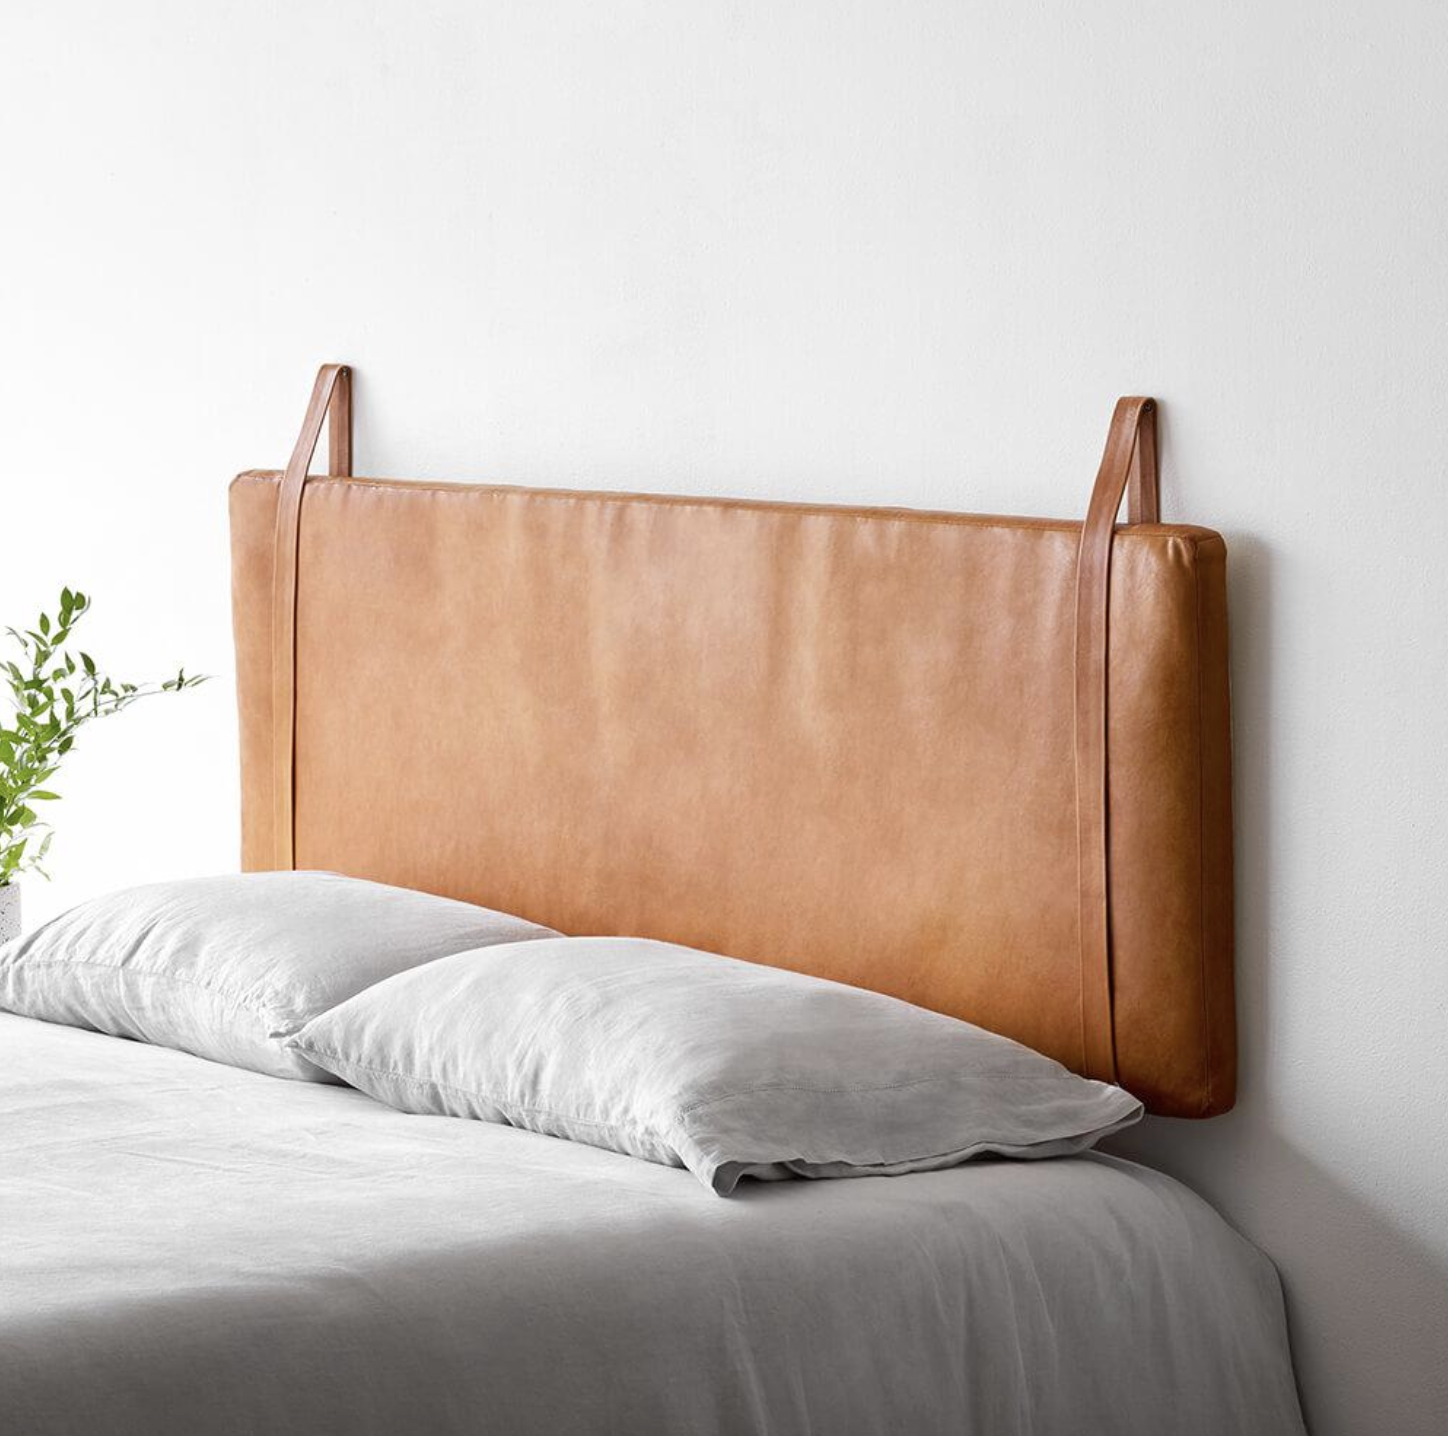 9 Wall Mounted Floating Headboards We, How To Attach Headboard A Wall